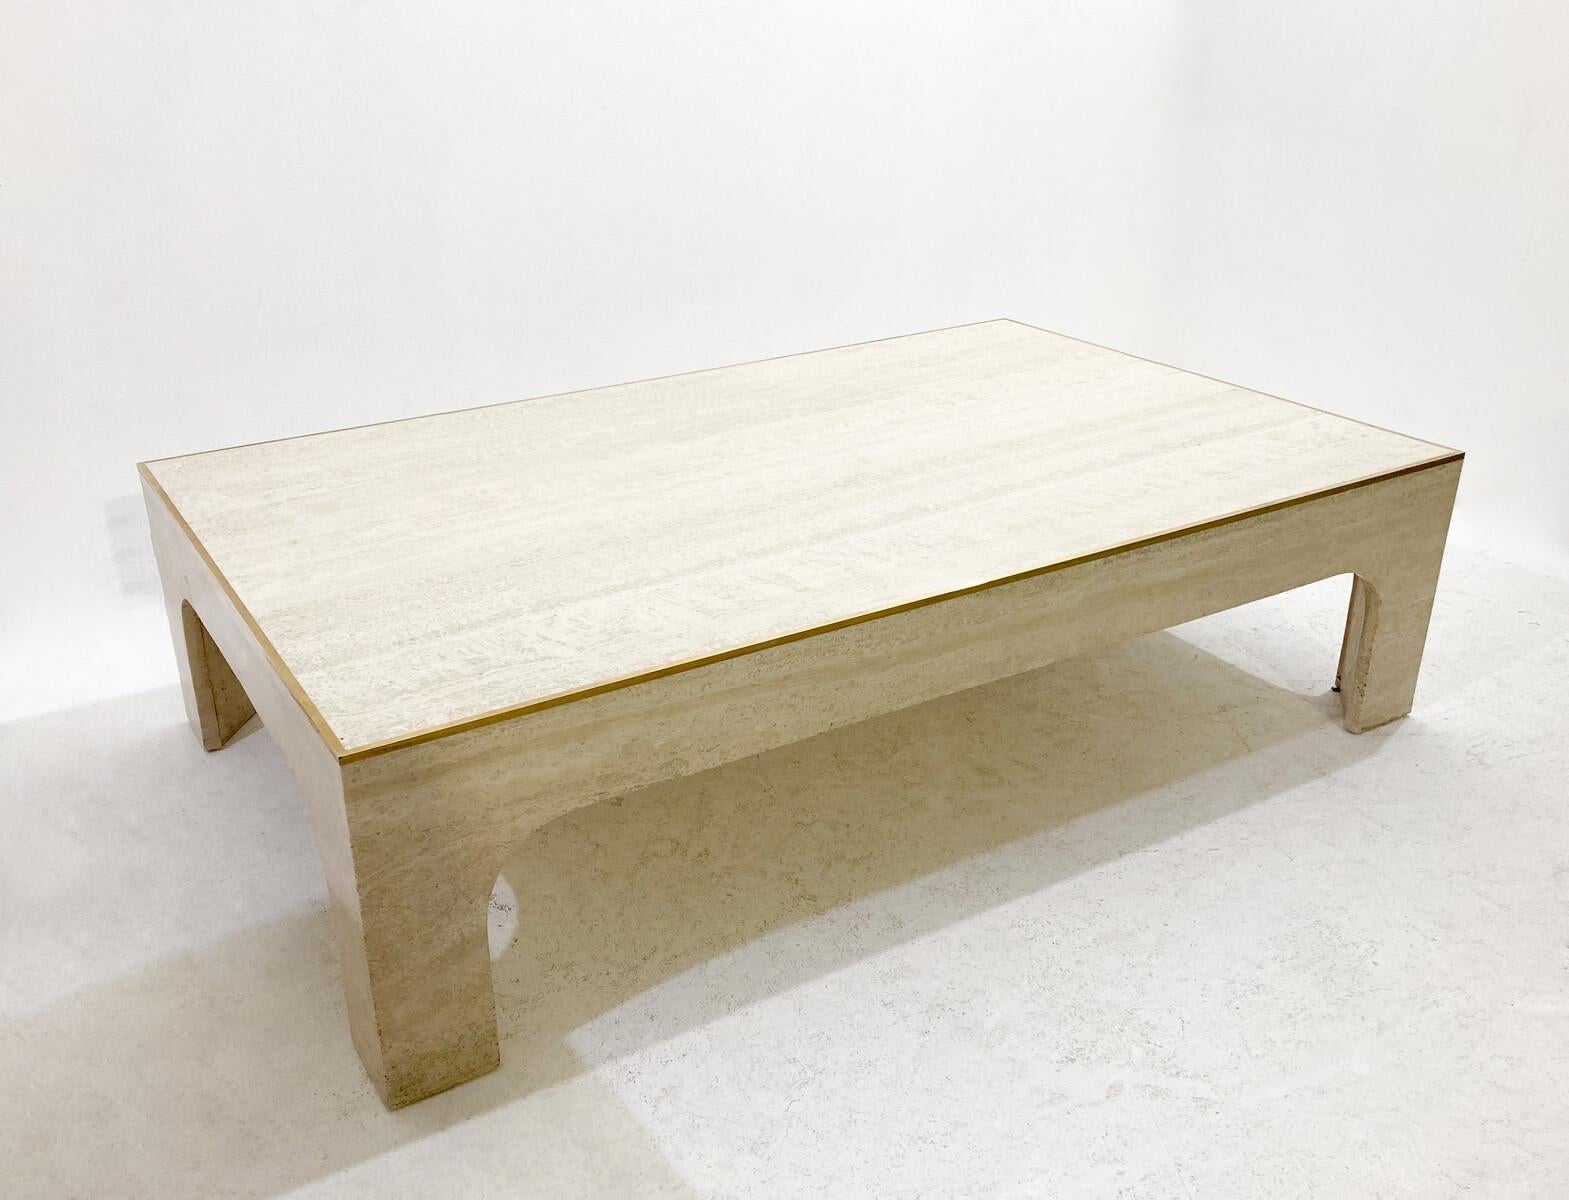 Italian Mid-Century Modern Travertine Coffee Table by Willy Rizzo, Italy, 1960s For Sale